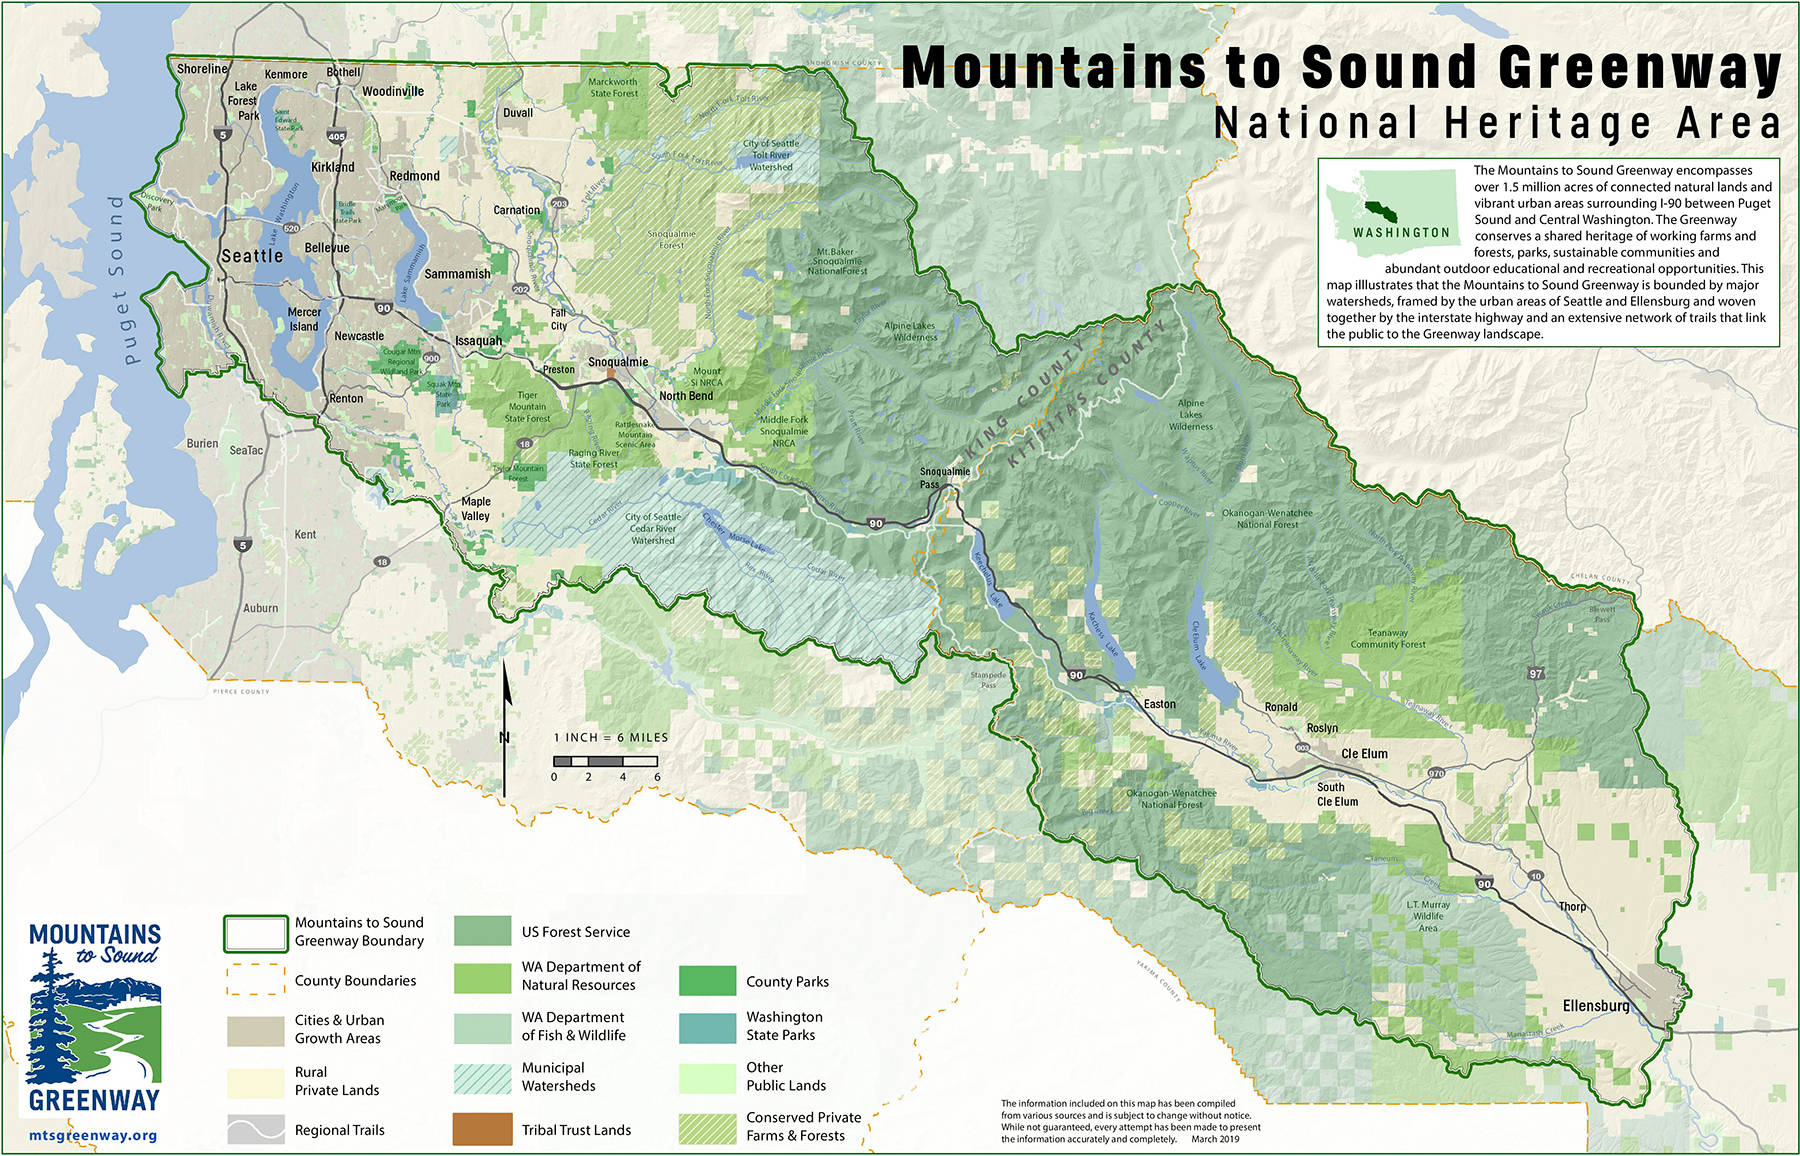 Mountains to Sound Greenway designated as a National Heritage Area